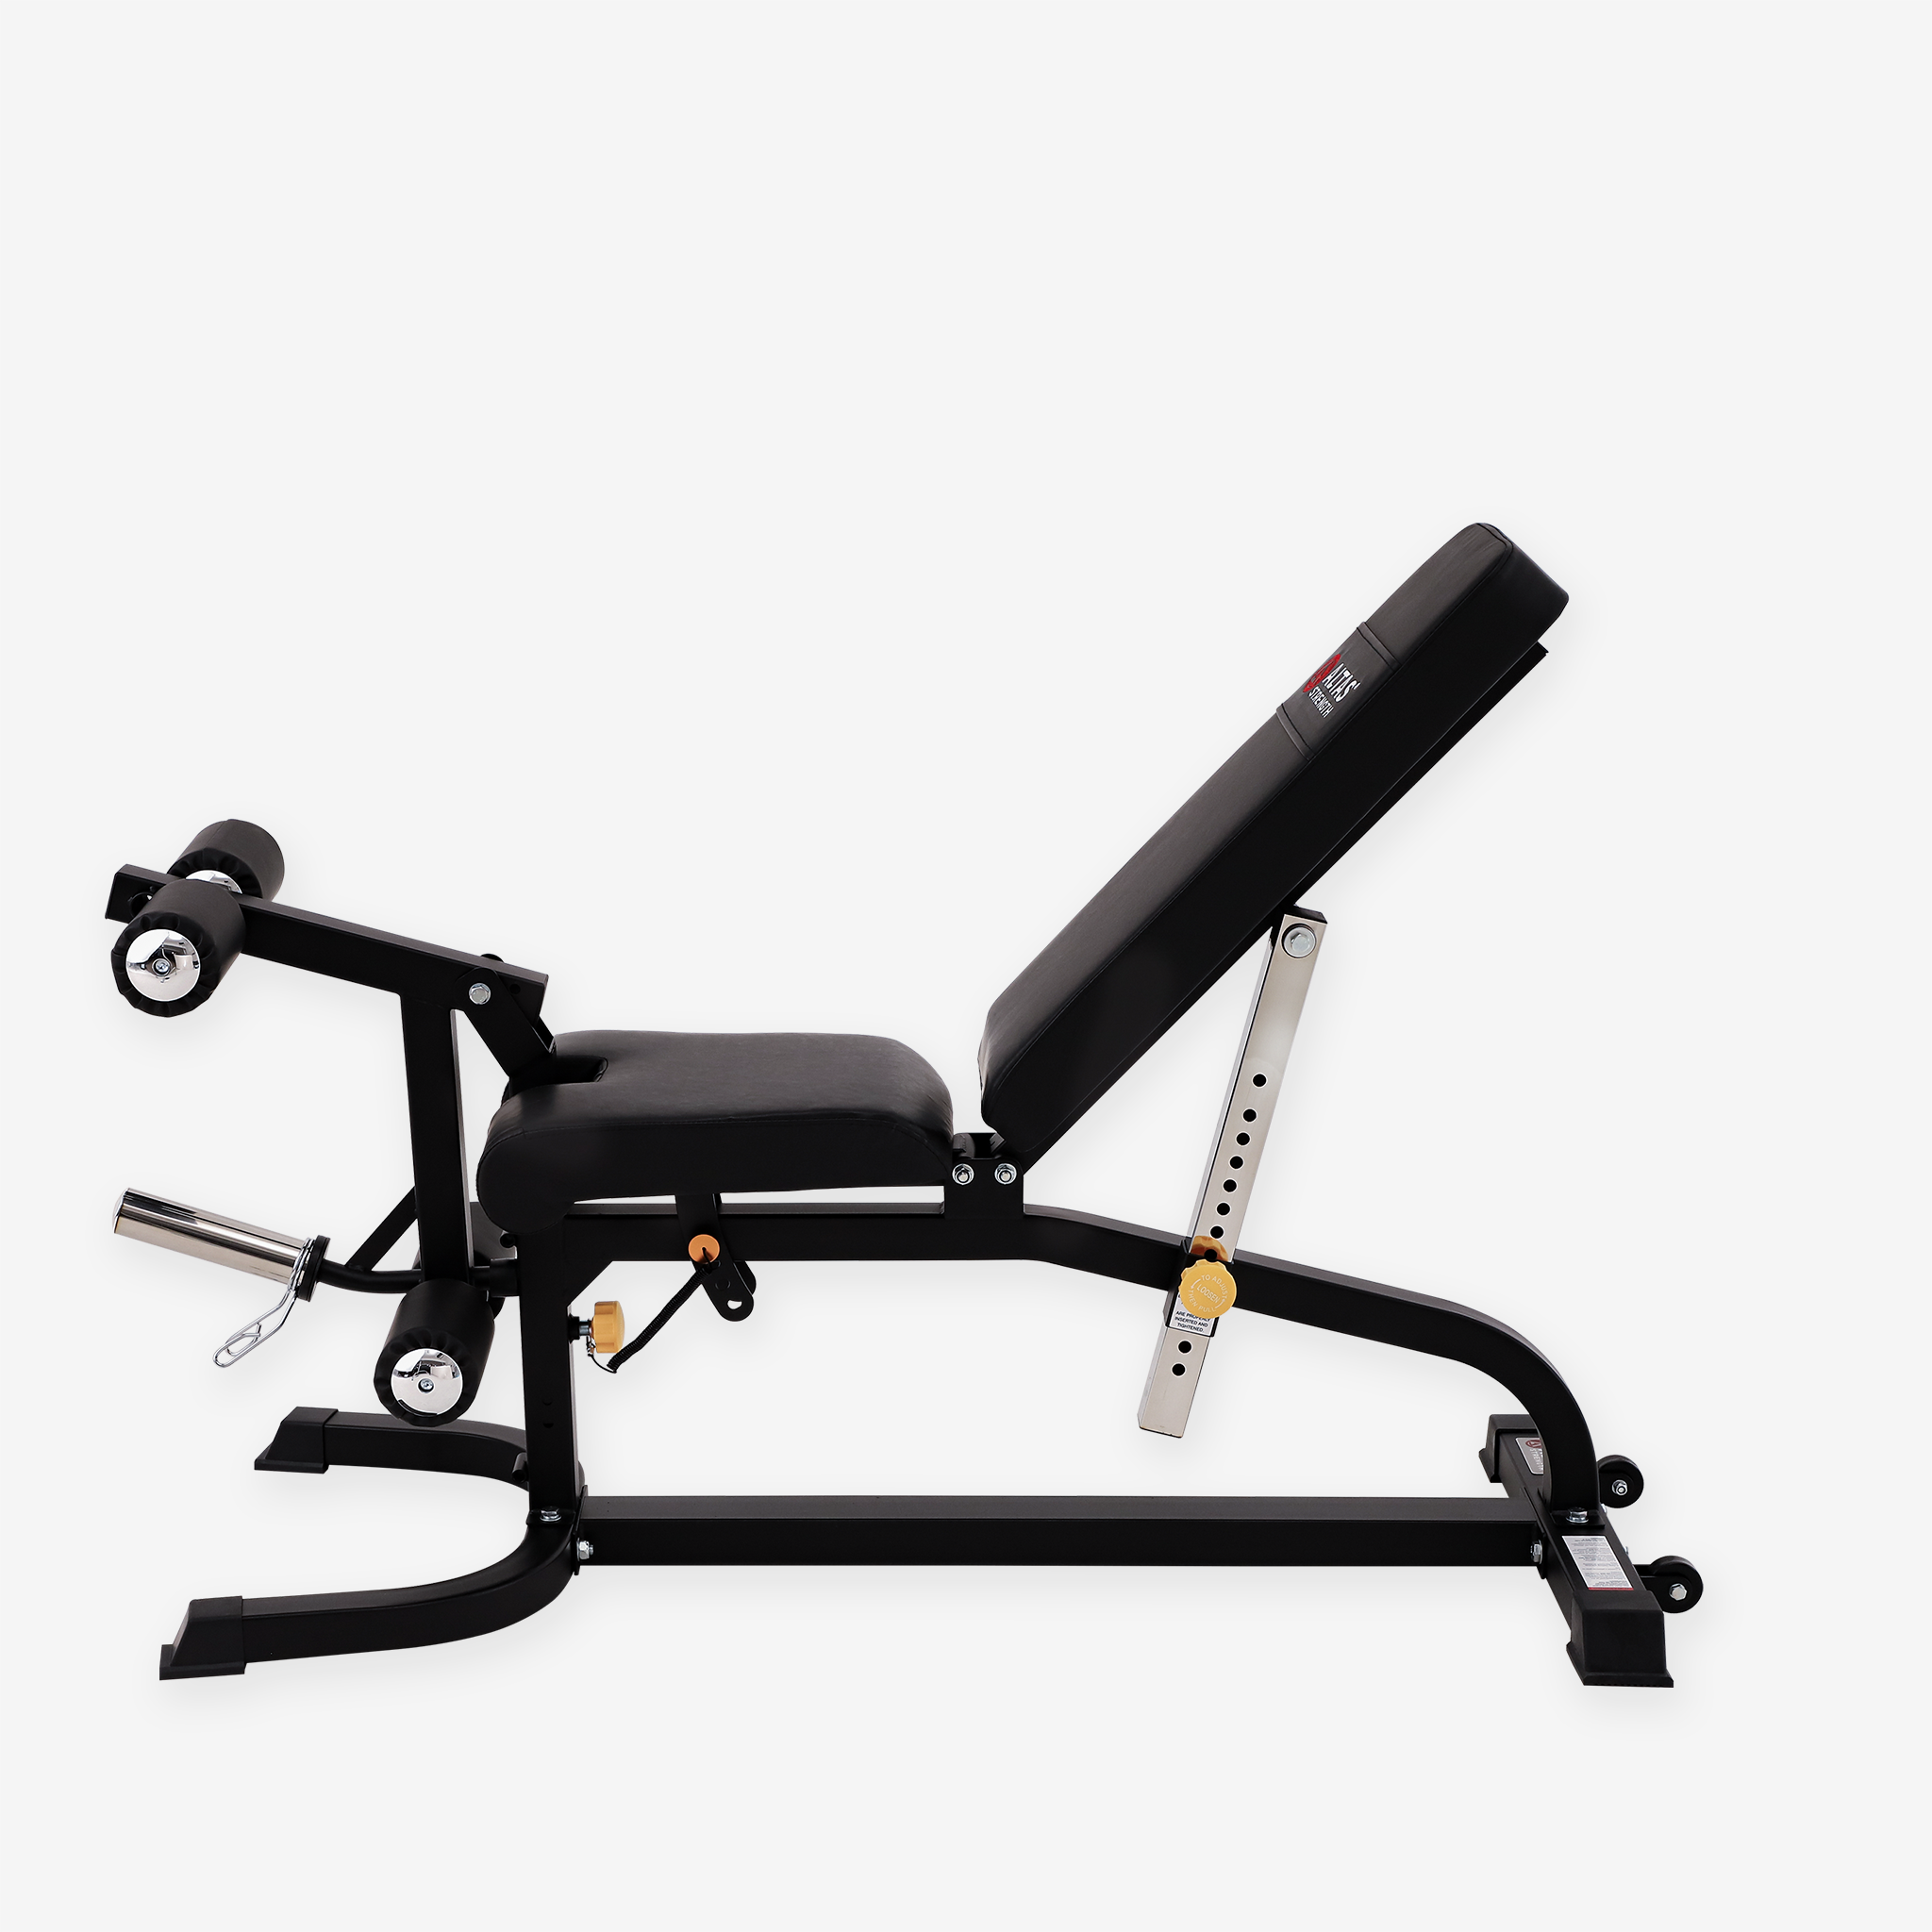 BEST Quality Multi Exercise Adjustable Chest Bench Press Incline